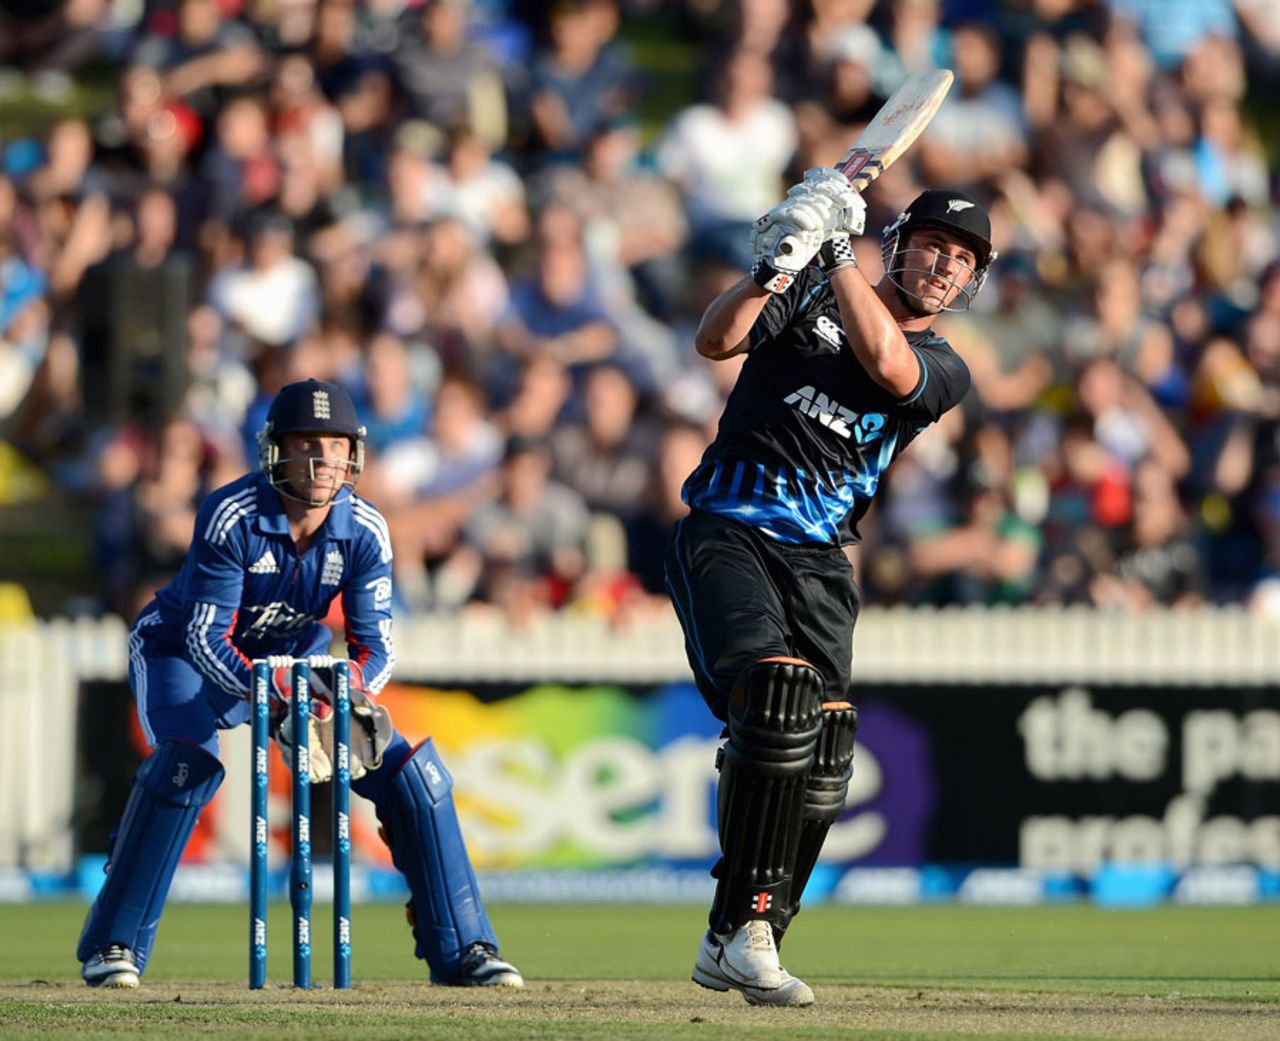 Hamish Rutherford helped New Zealand to a quick start, New Zealand v England, 2nd T20, Hamilton, February 12, 2013